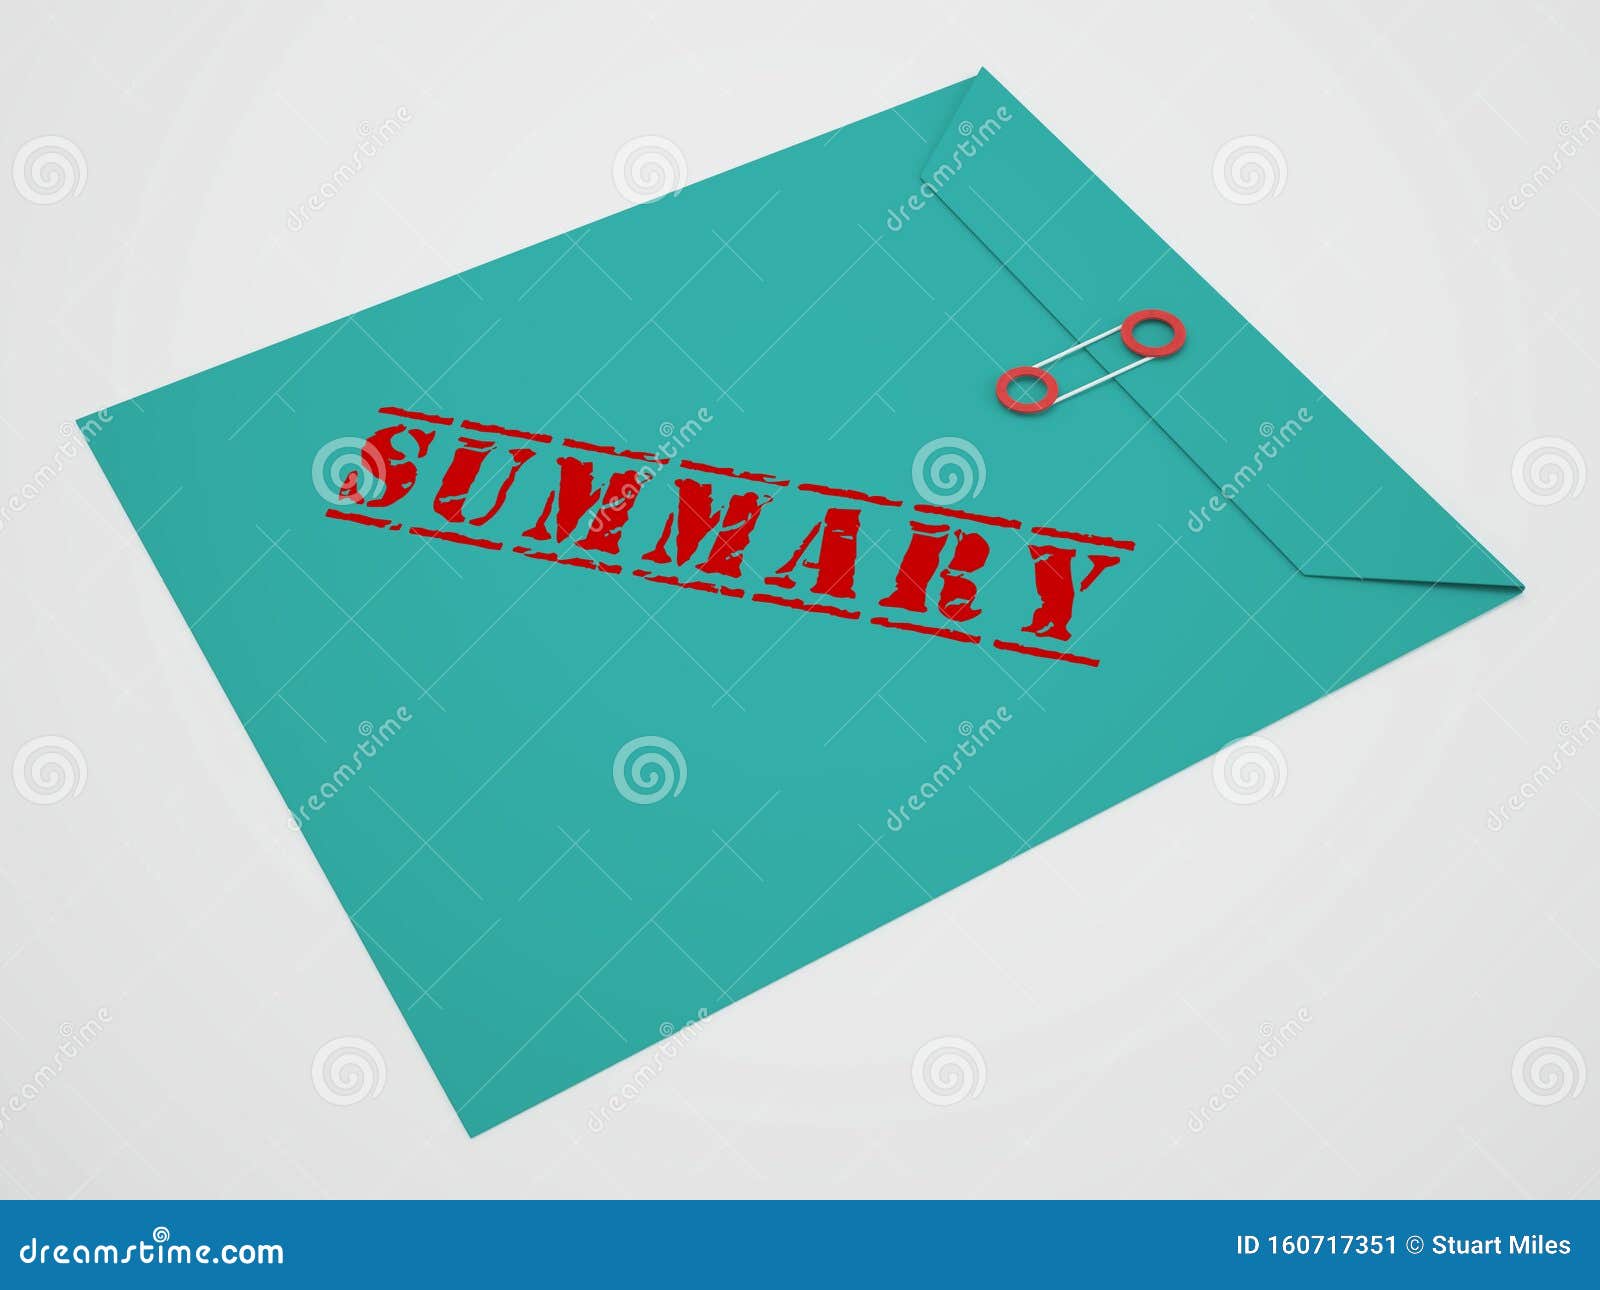 executive summary envelope icon showing short condensed report roundup 3d 